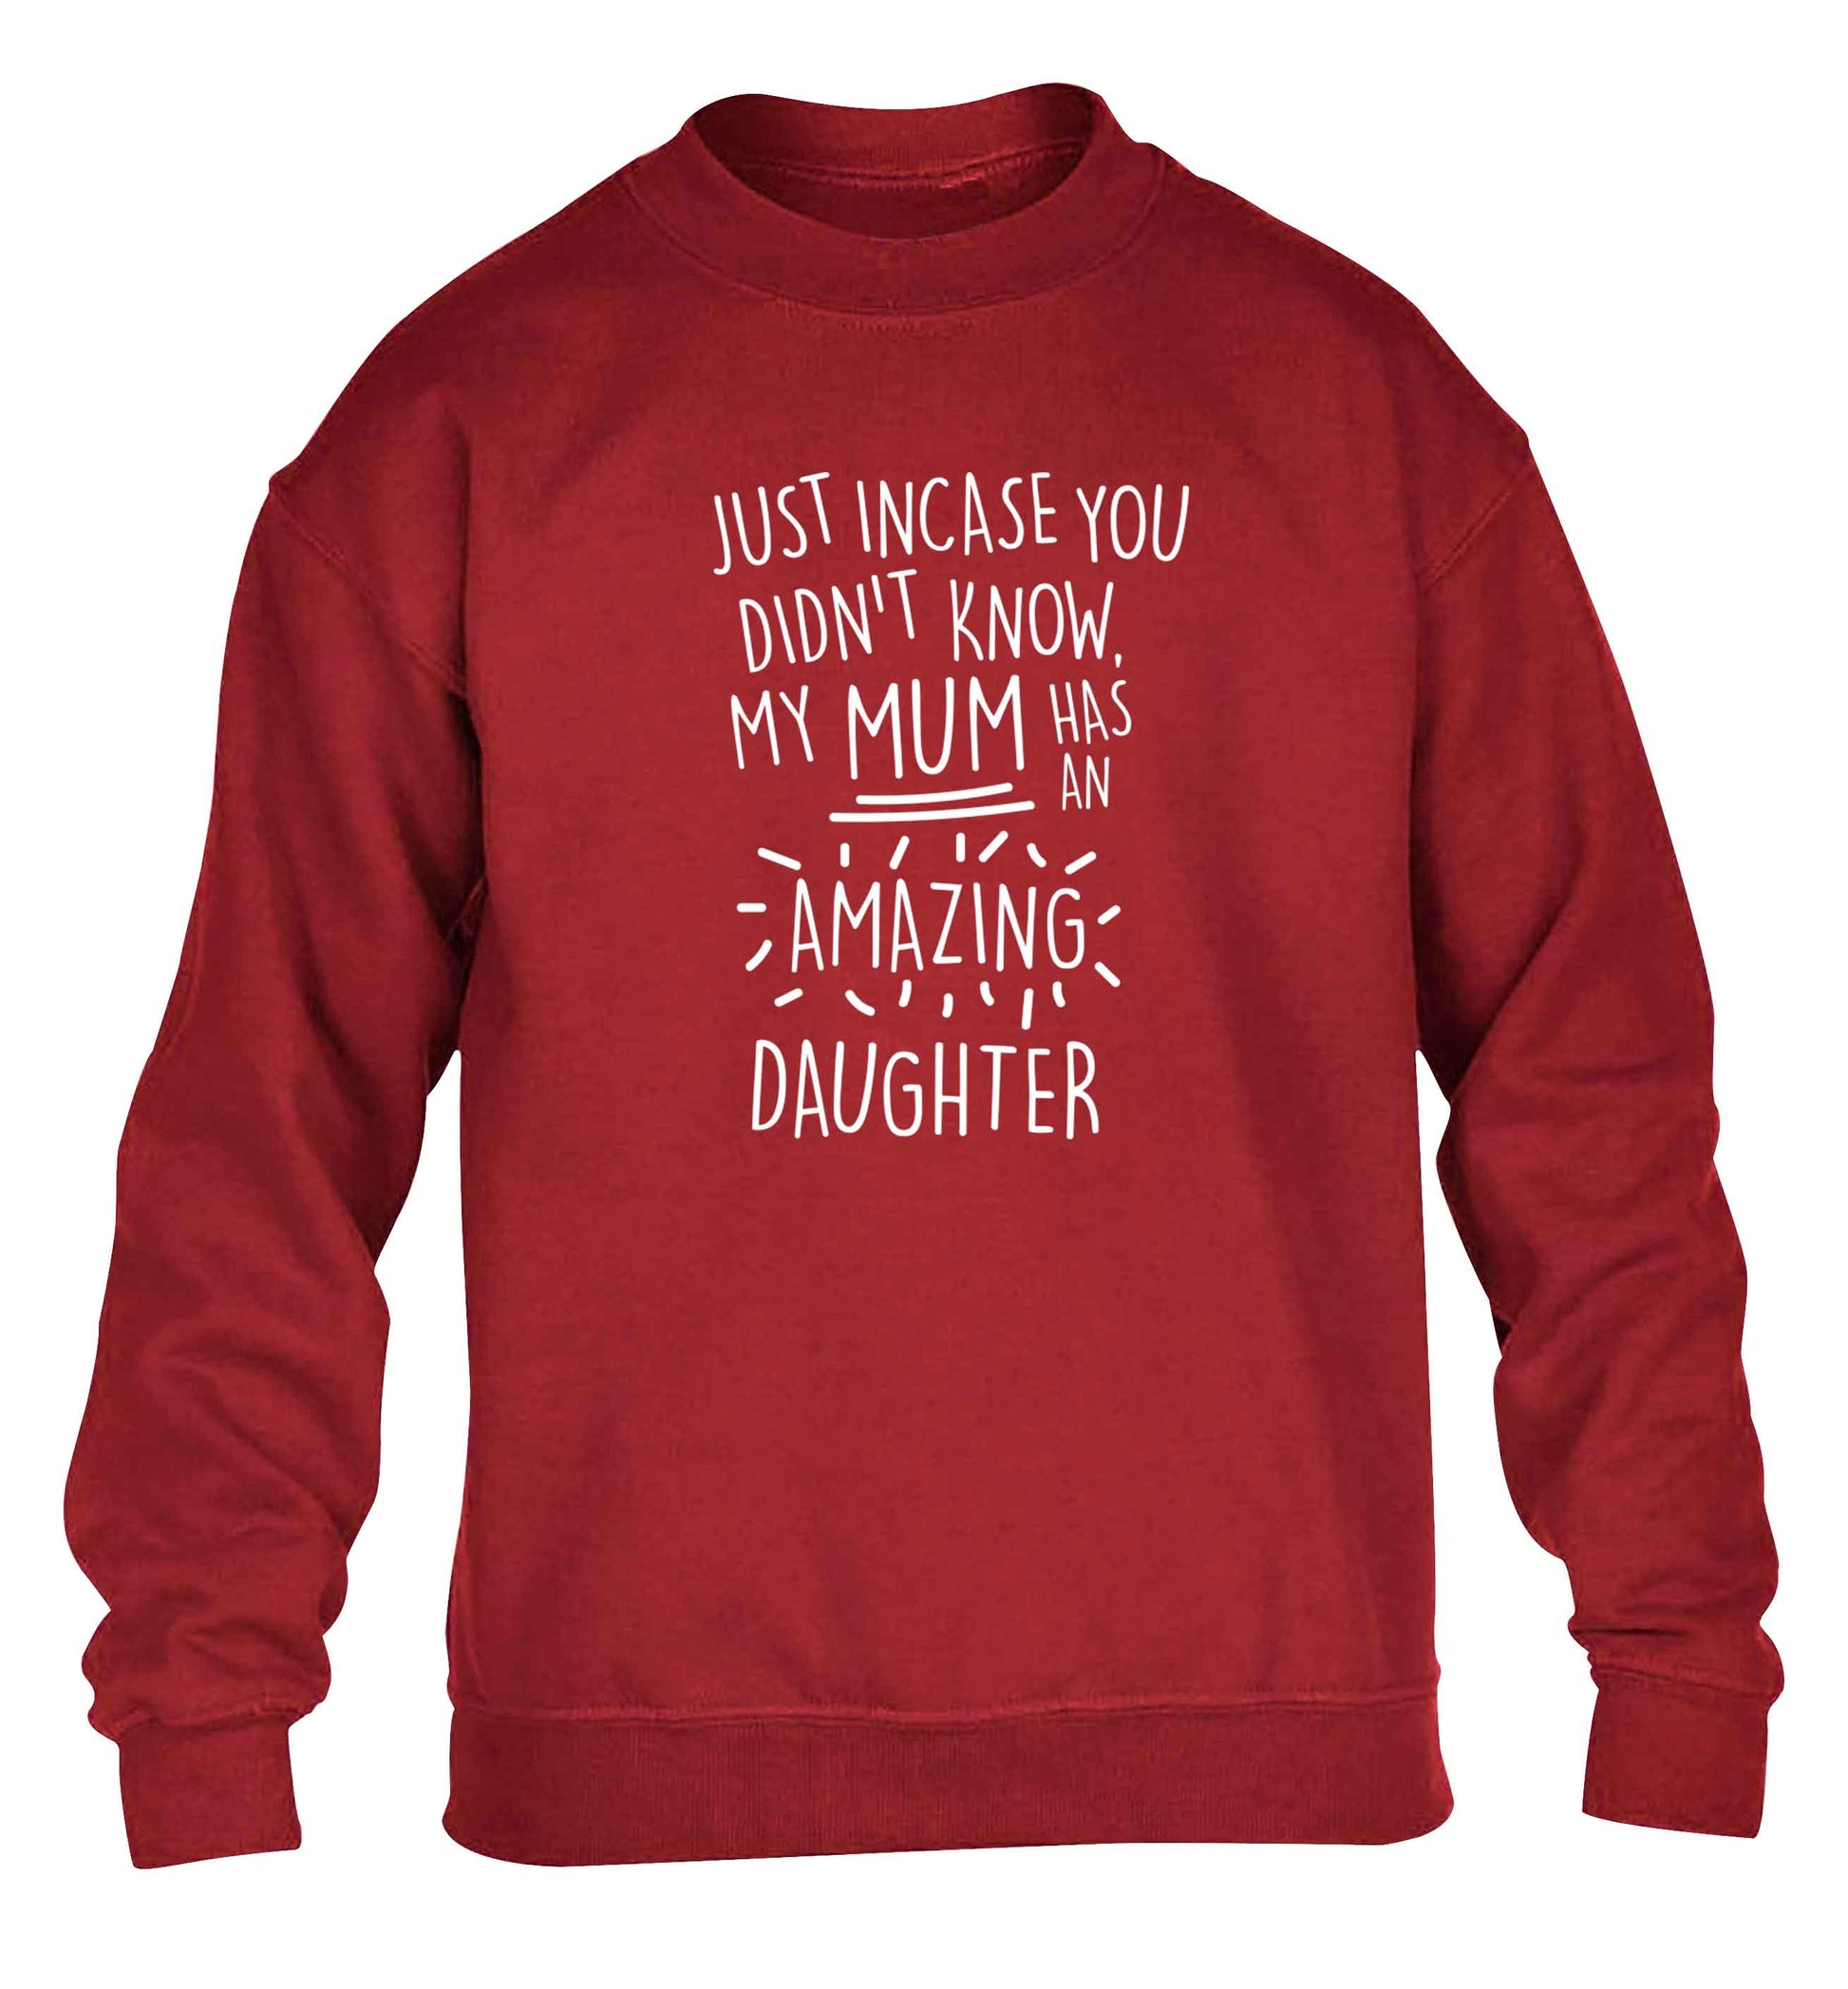 Just incase you didn't know my mum has an amazing daughter children's grey sweater 12-13 Years